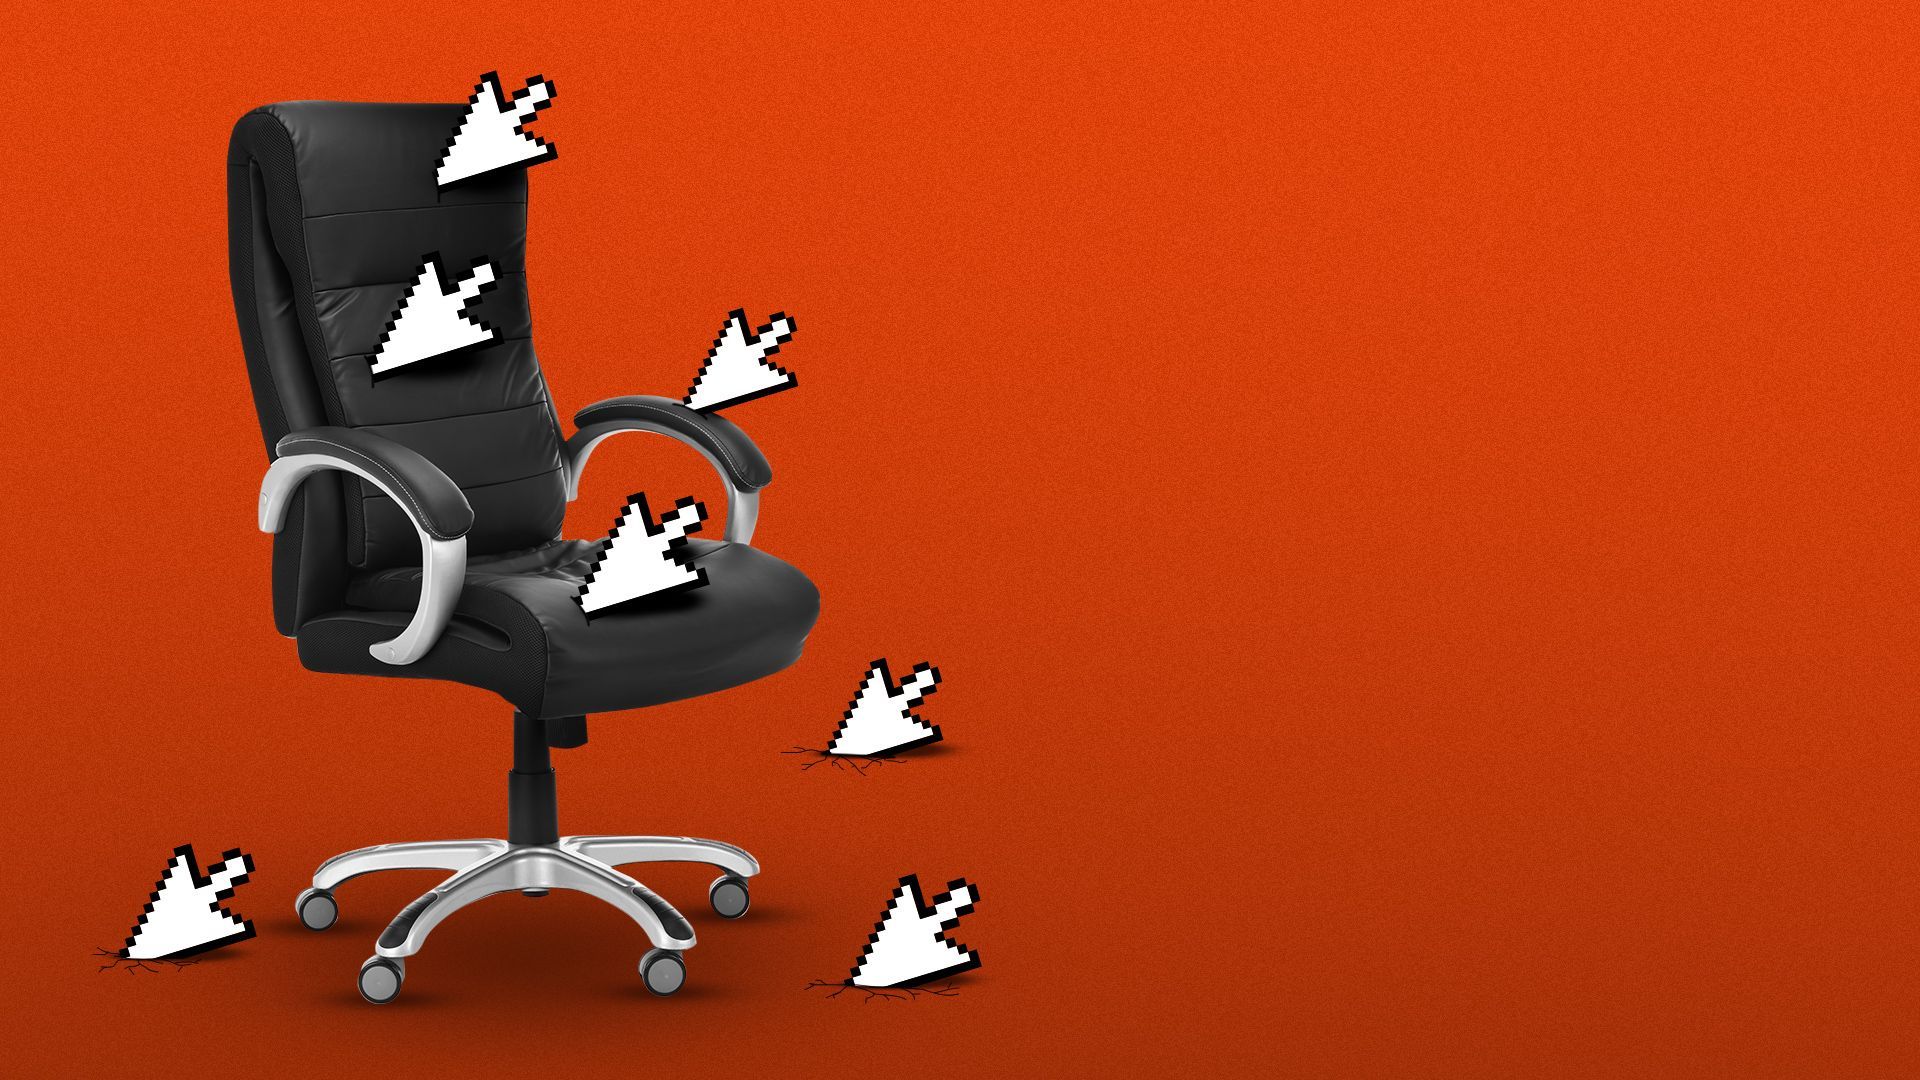 Illustration of an office chair pierced by multiple computer cursors. 